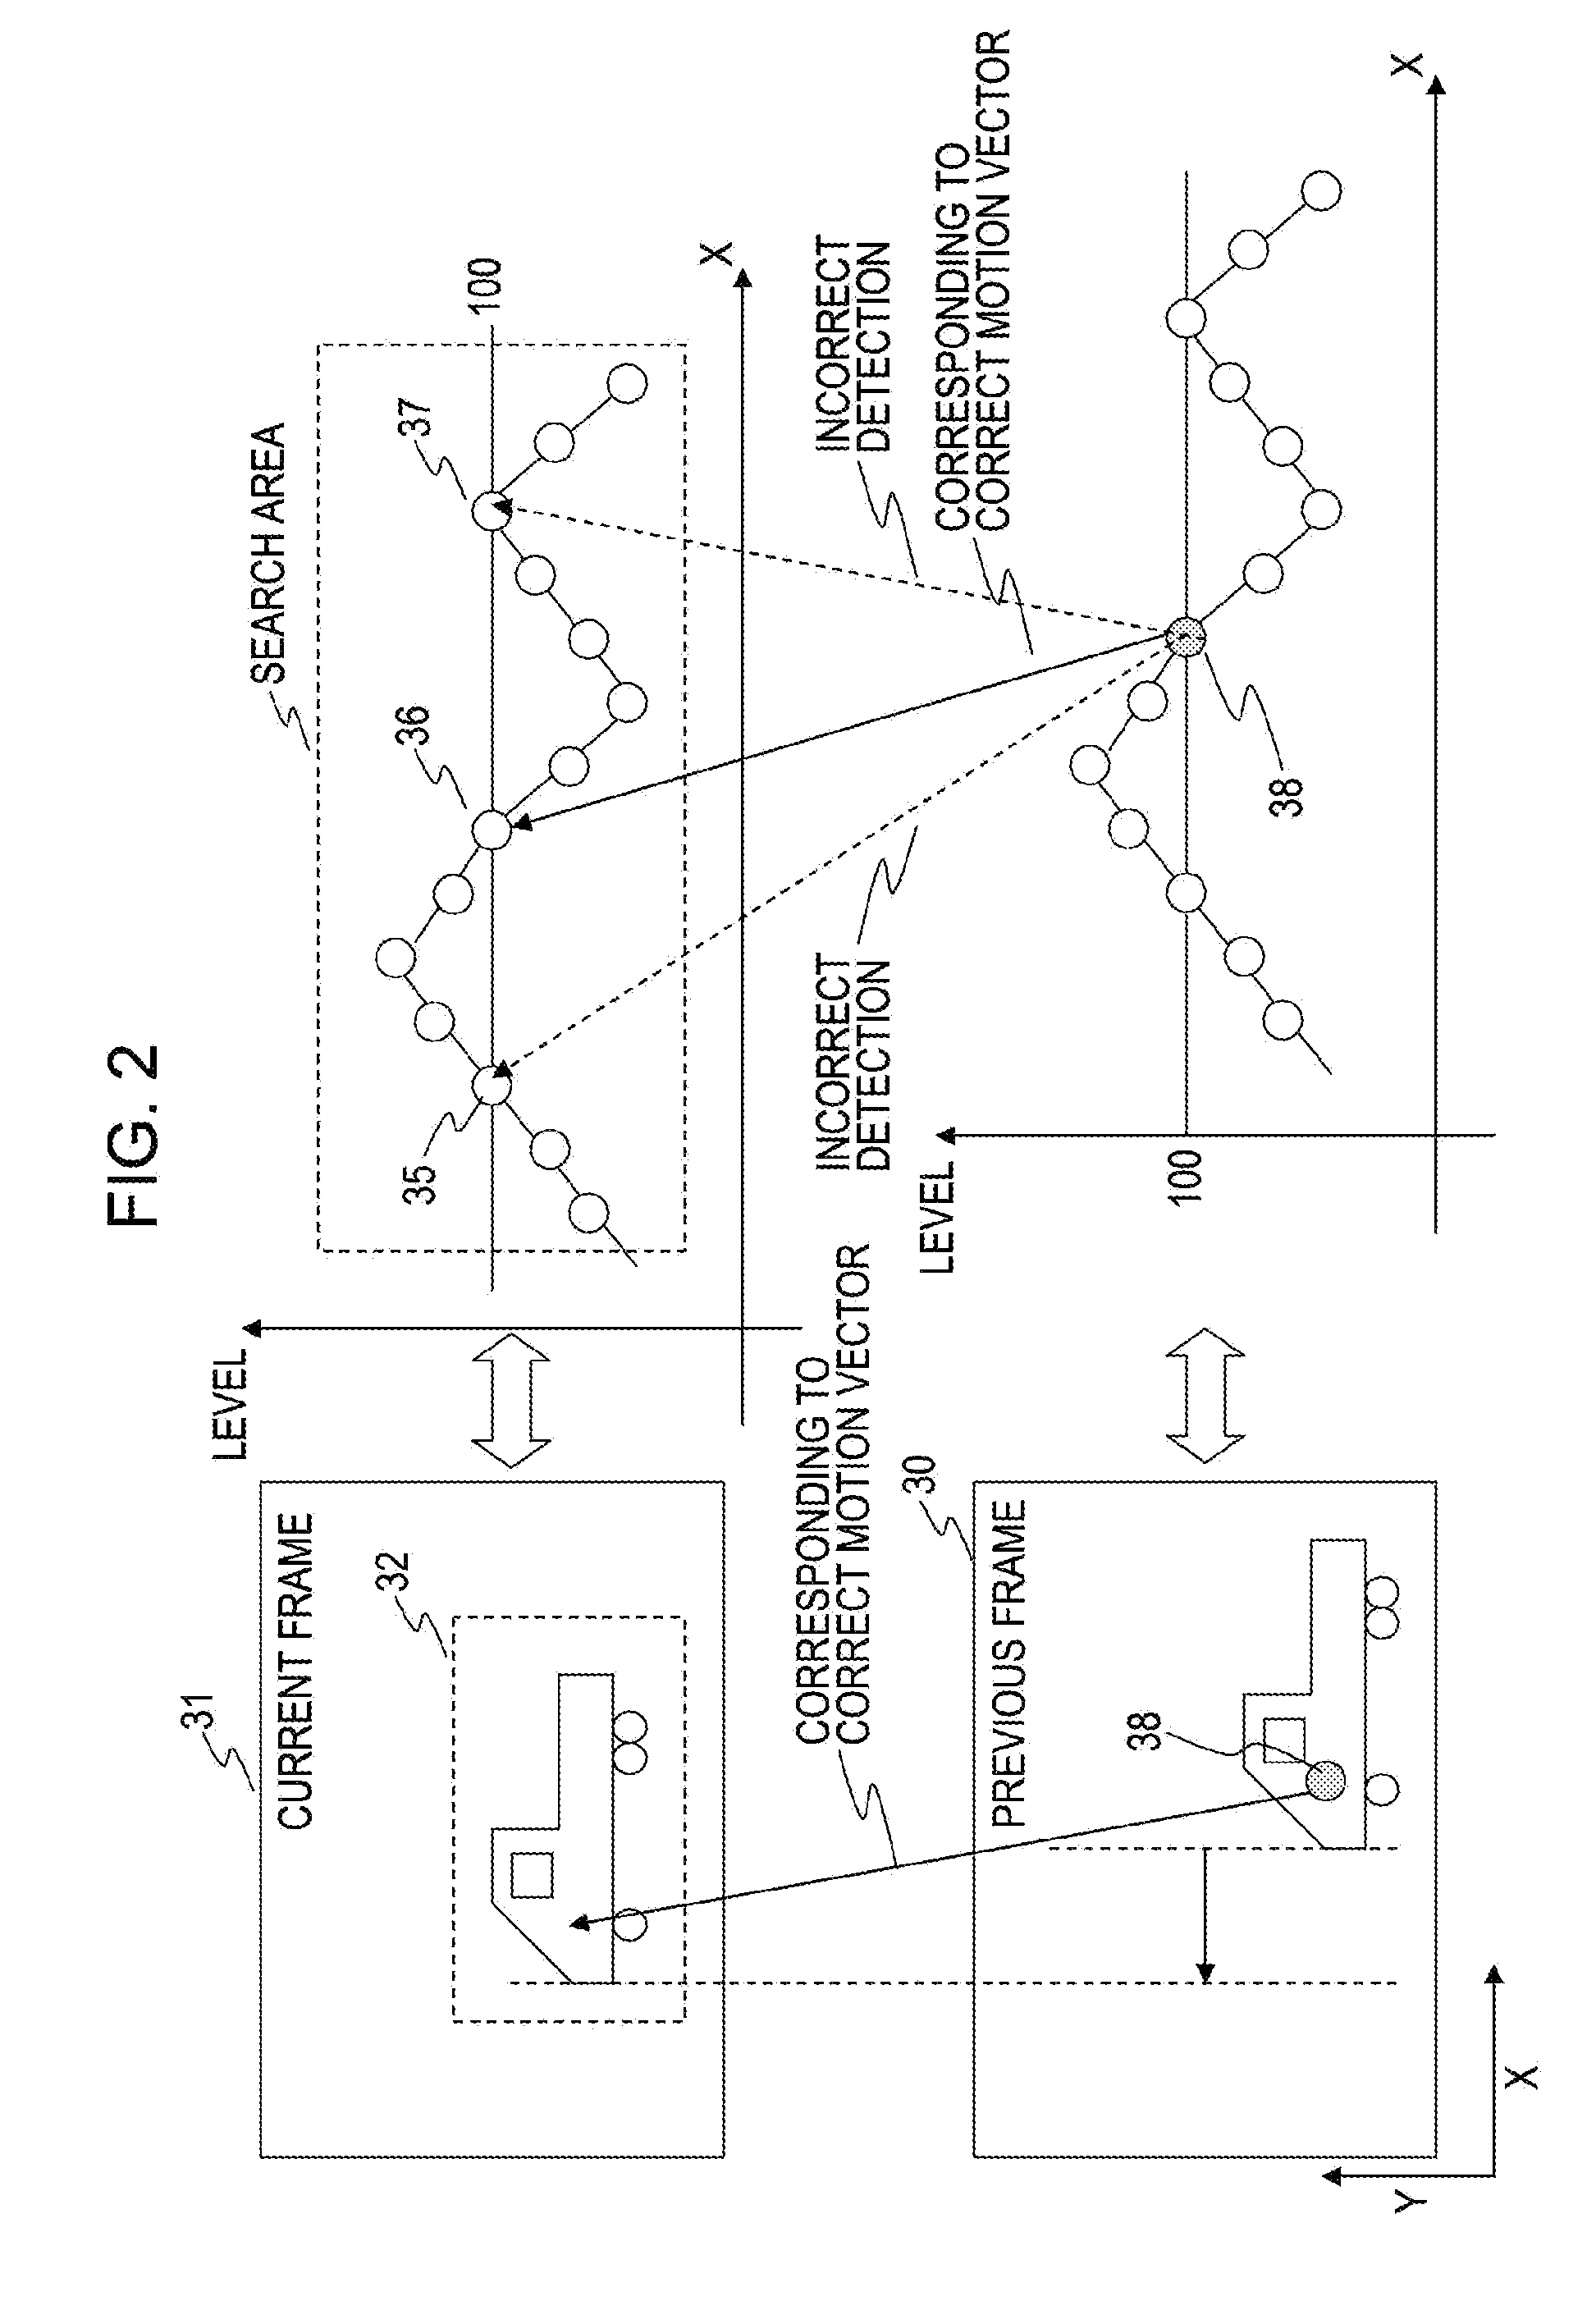 Motion-vector detecting device, motion-vector detecting method, and computer program